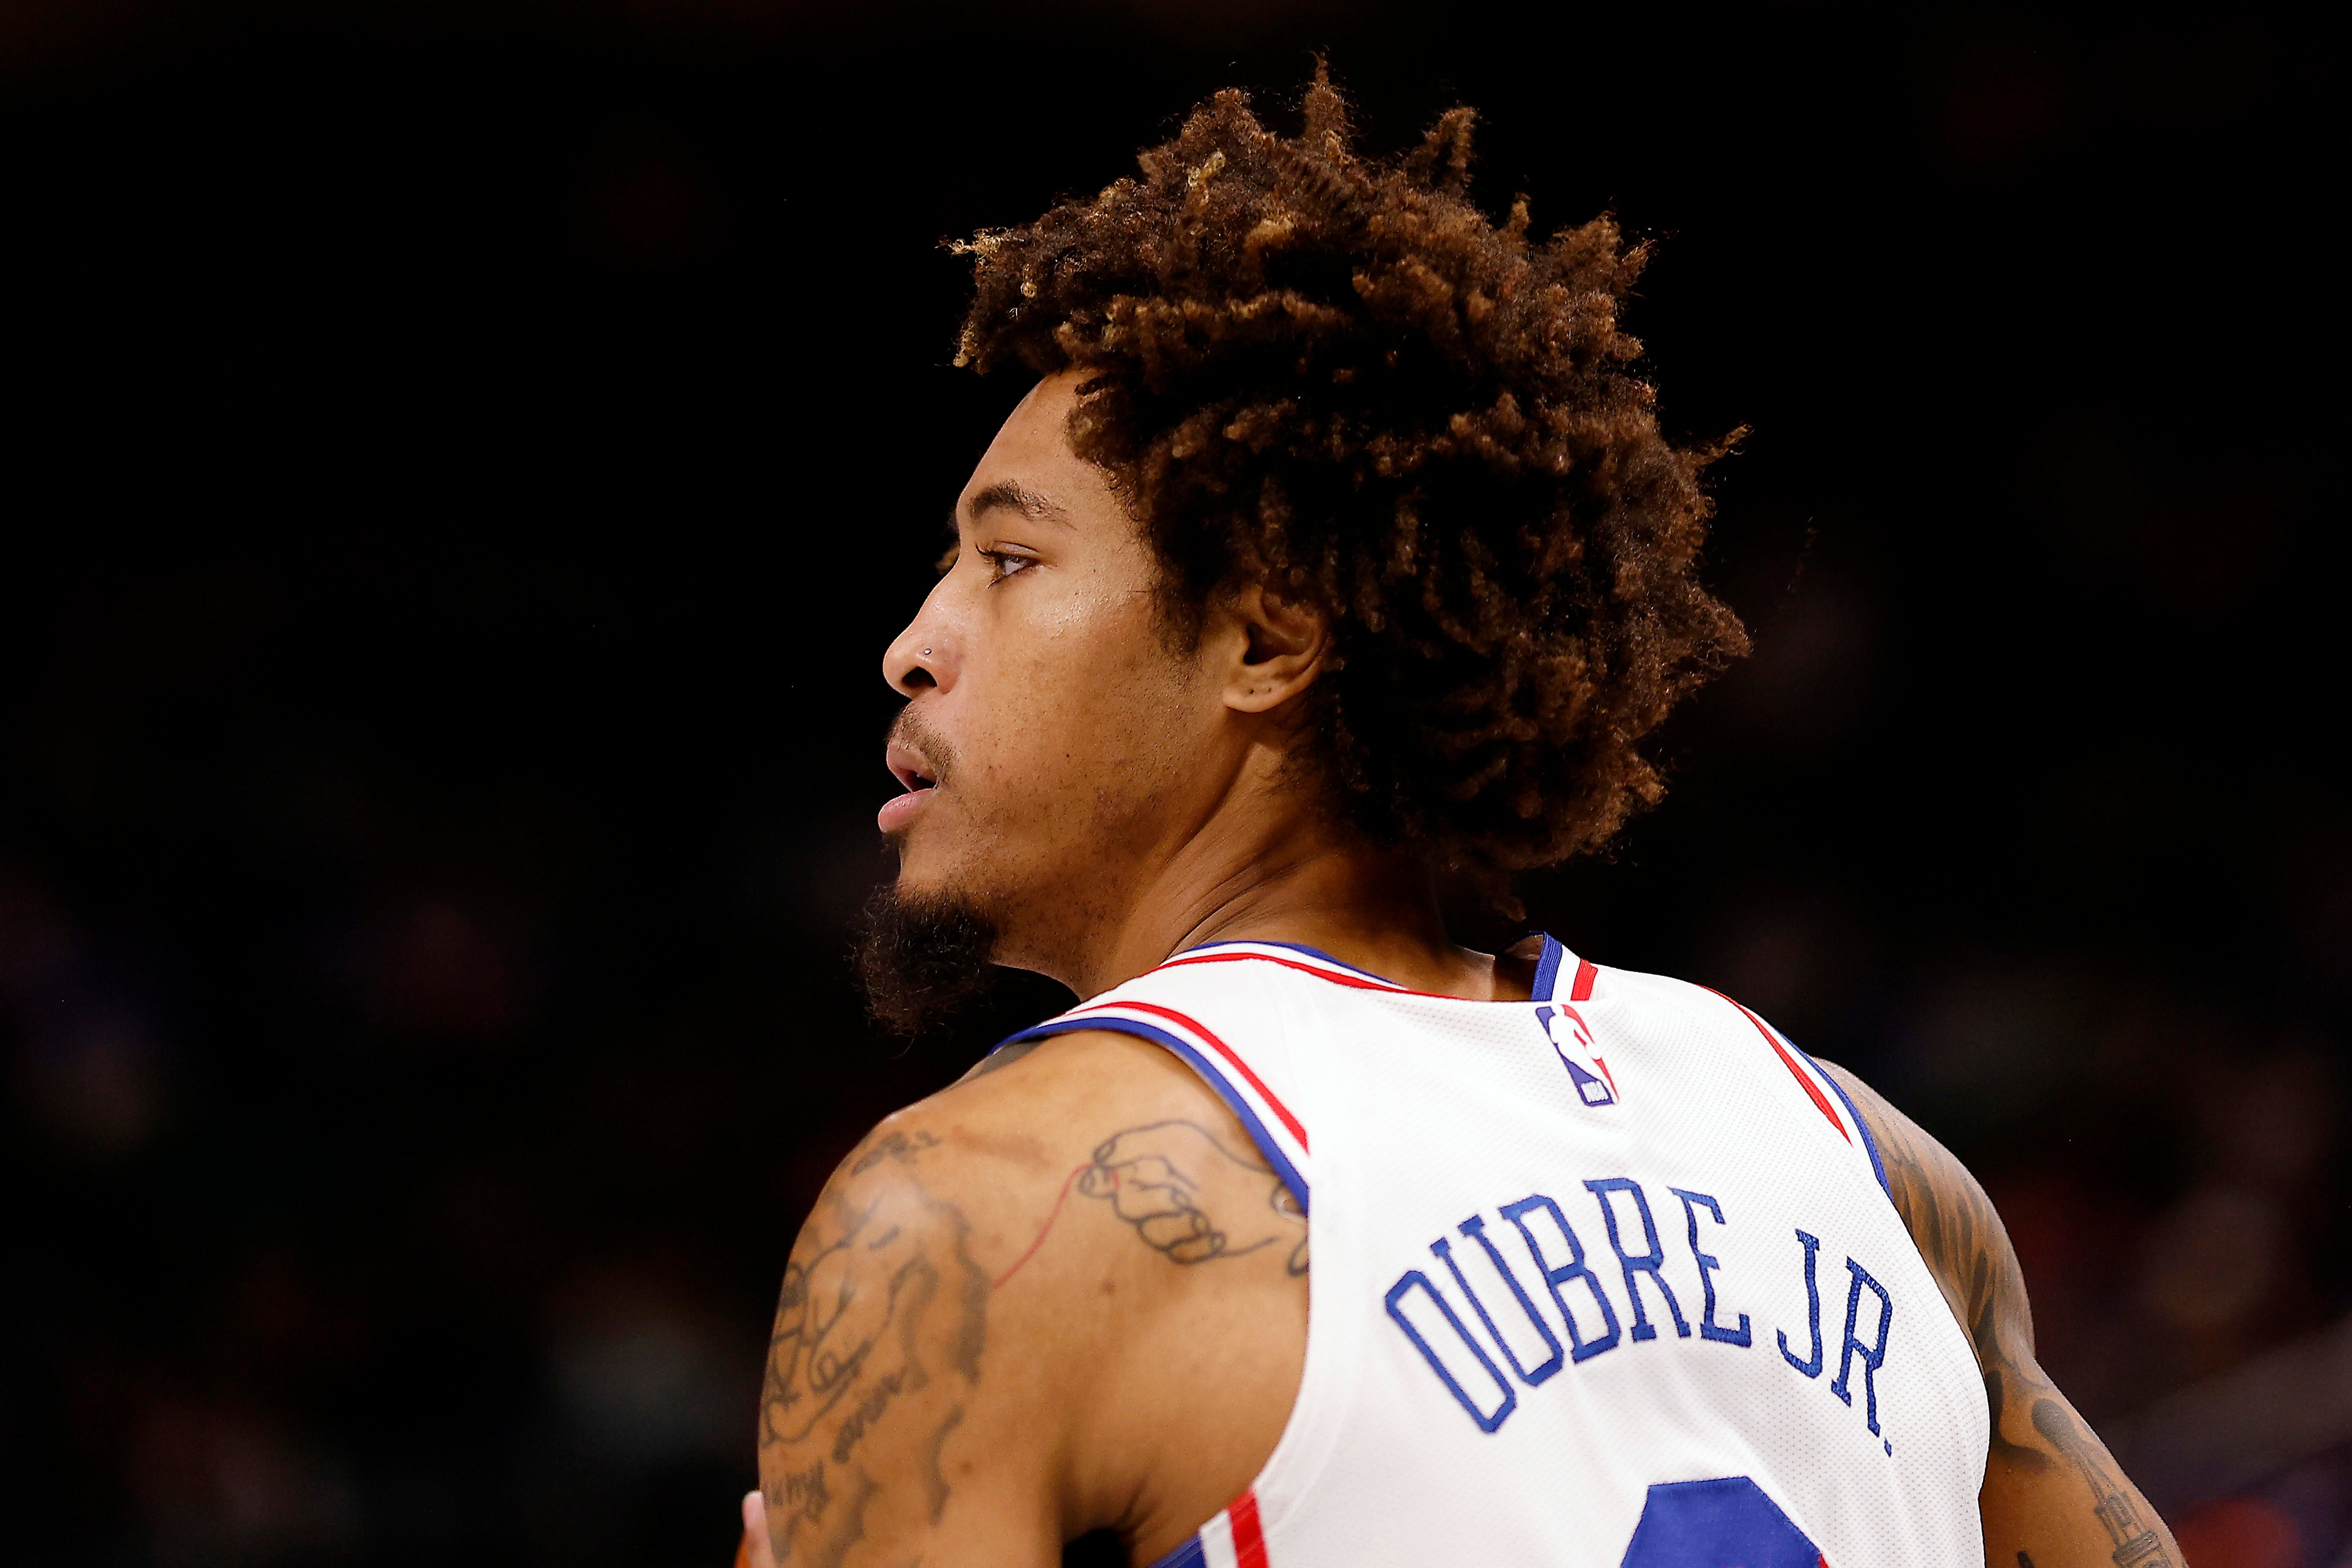 76ers' Kelly Oubre Jr. struck by motor vehicle near residence, expected to miss significant time, per reports